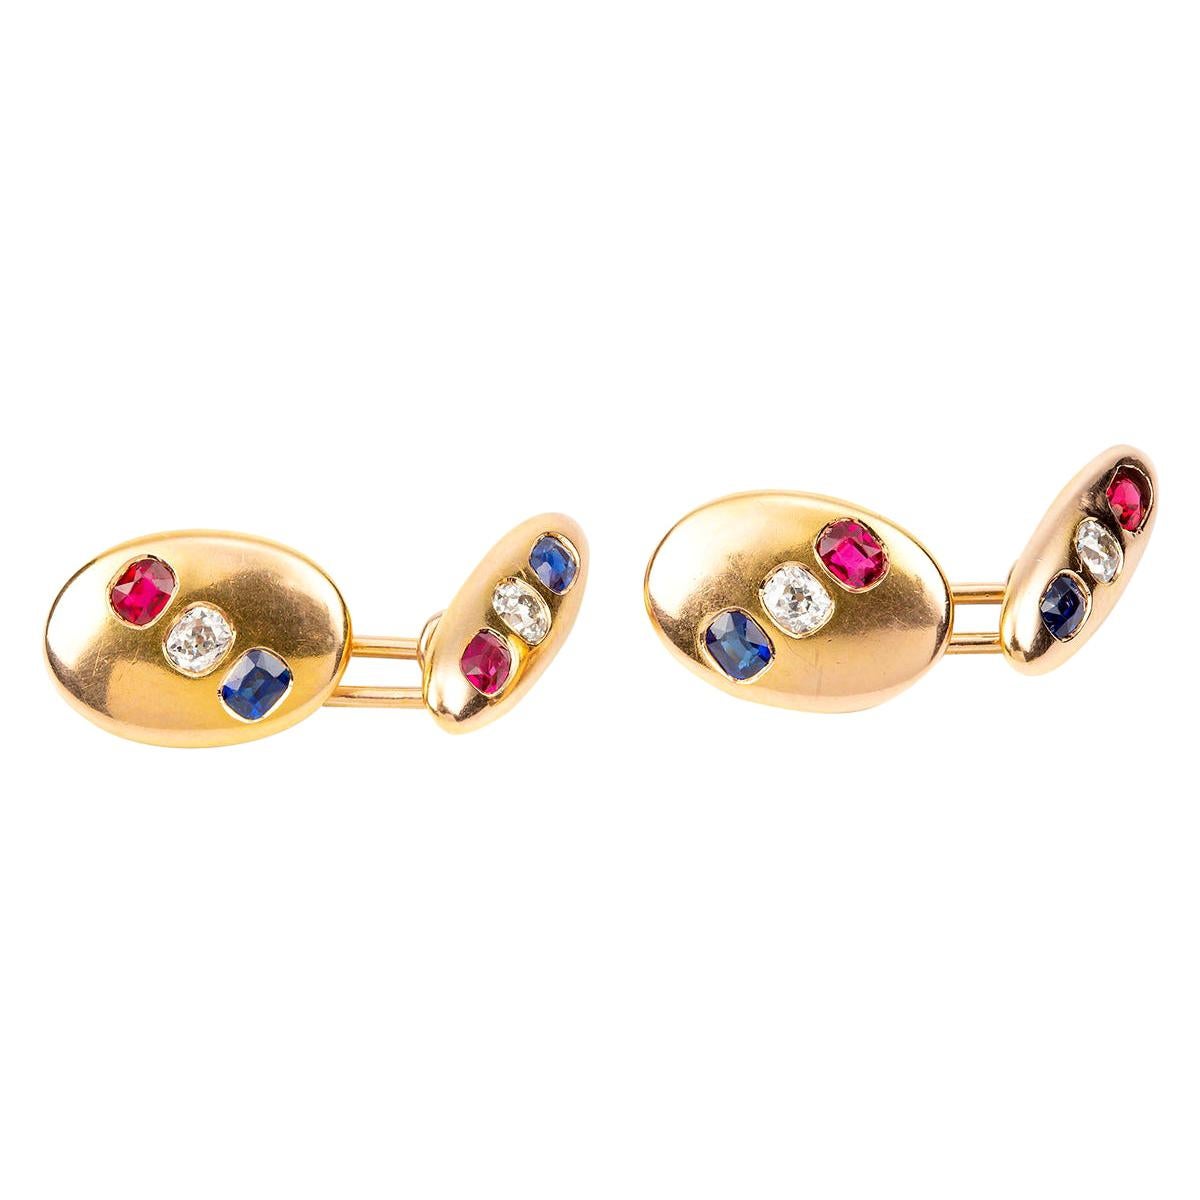 Antique Cufflinks in 18 Carat Gold with Diamond, Ruby & Sapphire, English, 1900 For Sale